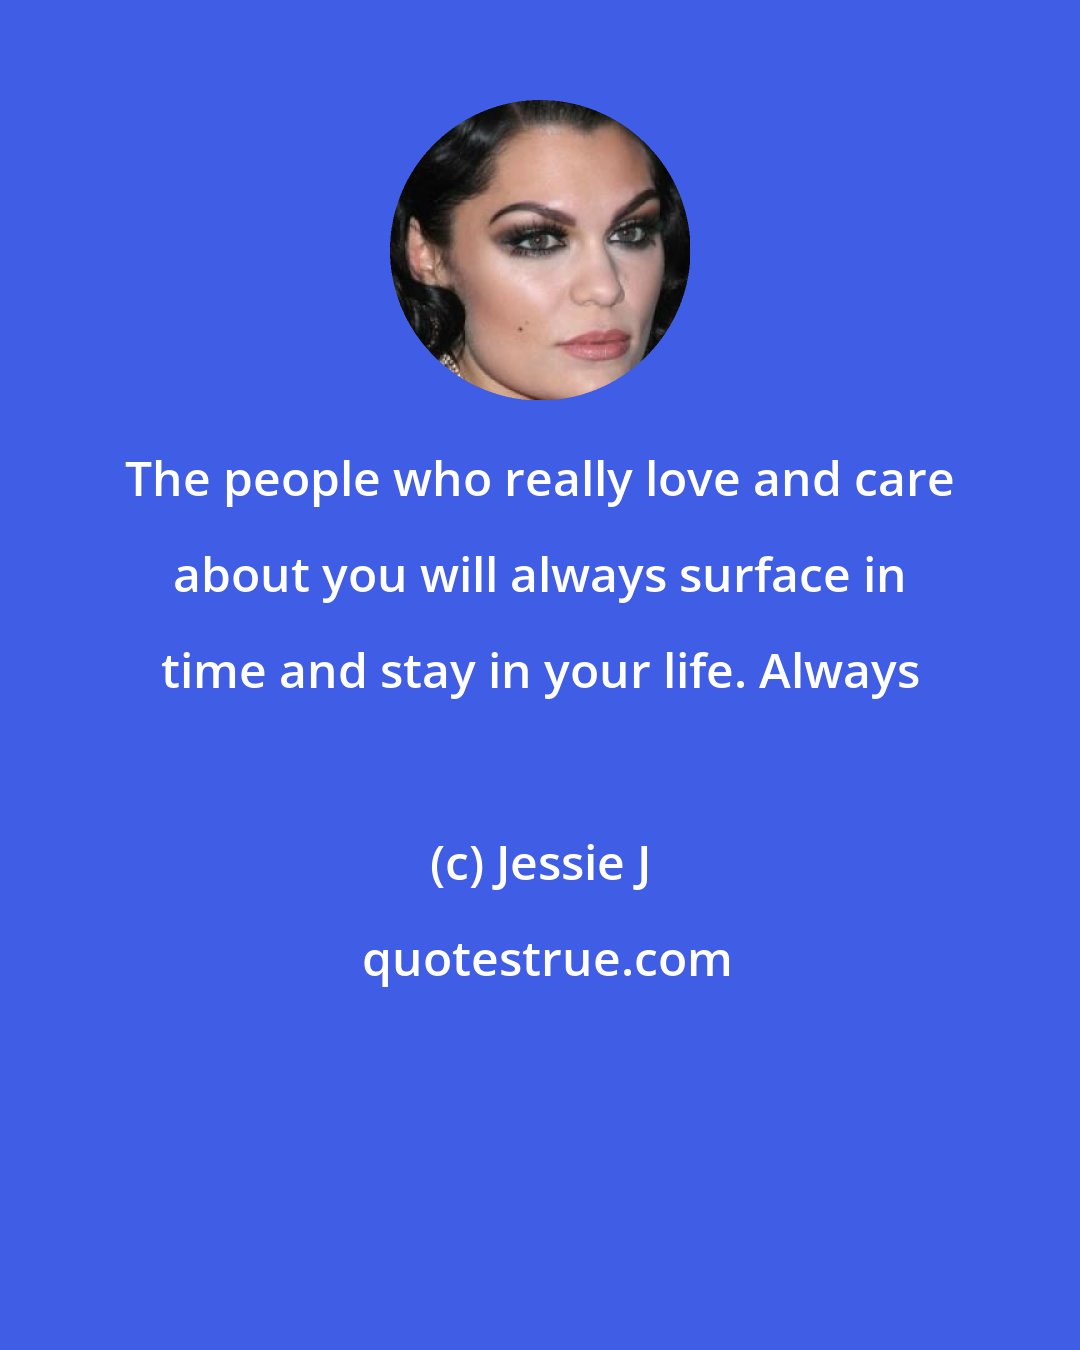 Jessie J: The people who really love and care about you will always surface in time and stay in your life. Always